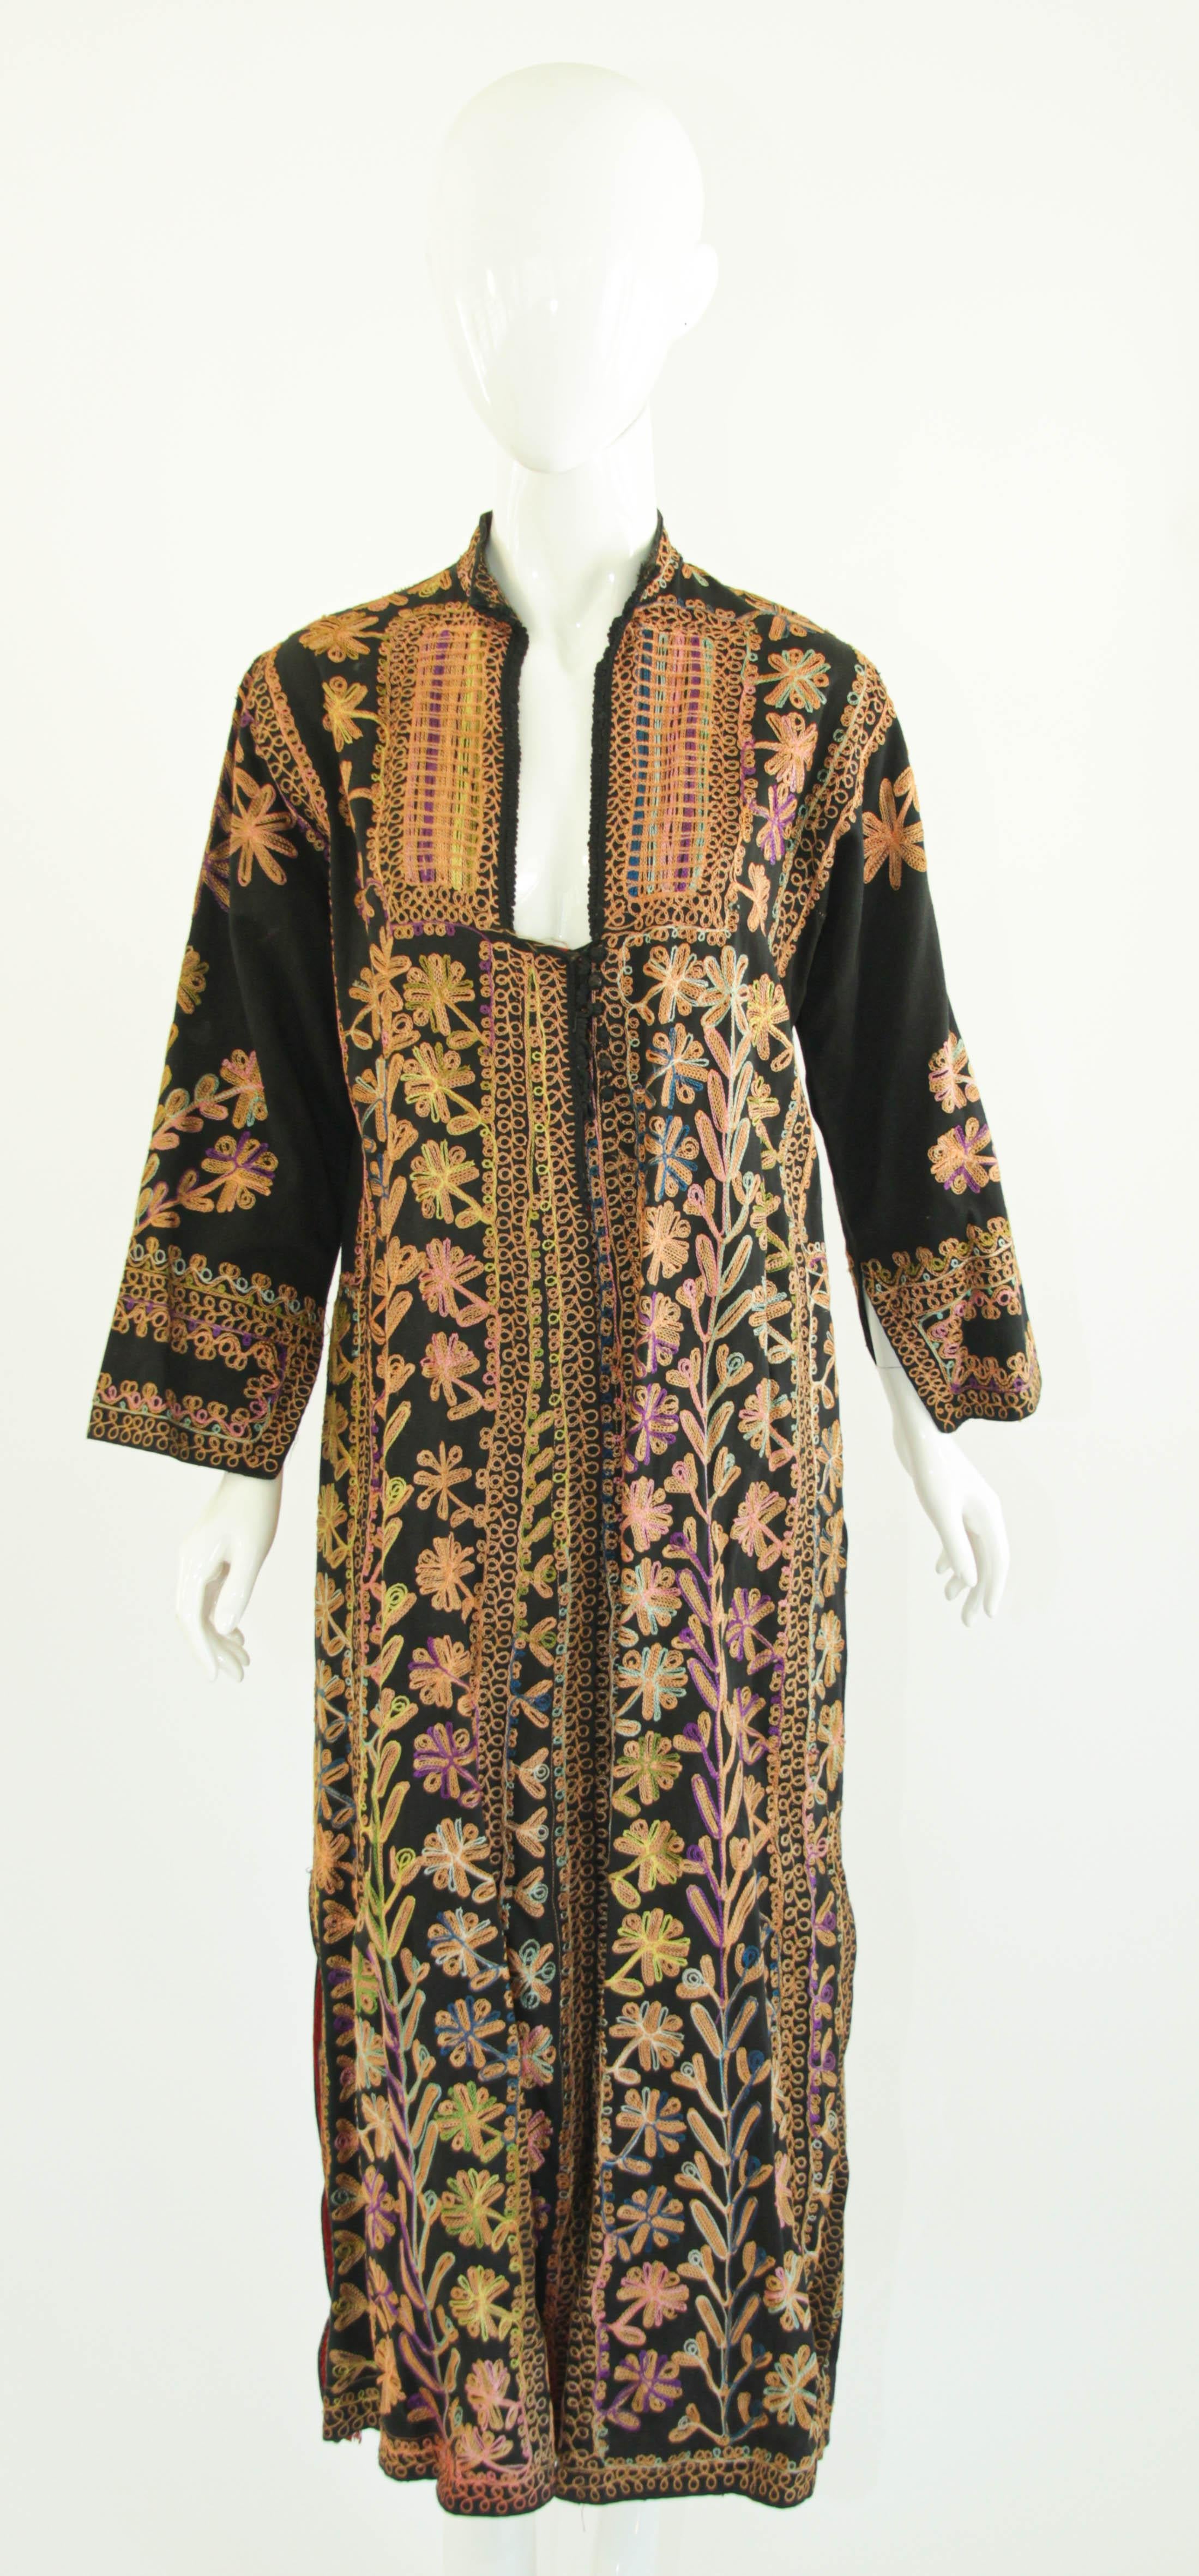 Vintage kuchi dress from Afghanistan, Ethnic Boho Baluchi ethnic dress, embroidered dress circa 1970s.
Vintage embroidered Afghan Kuchi kaftan dress coat. 
Floral patterned cotton with embroidery covering.
Stunning intricate Afghan Kuchi tribe